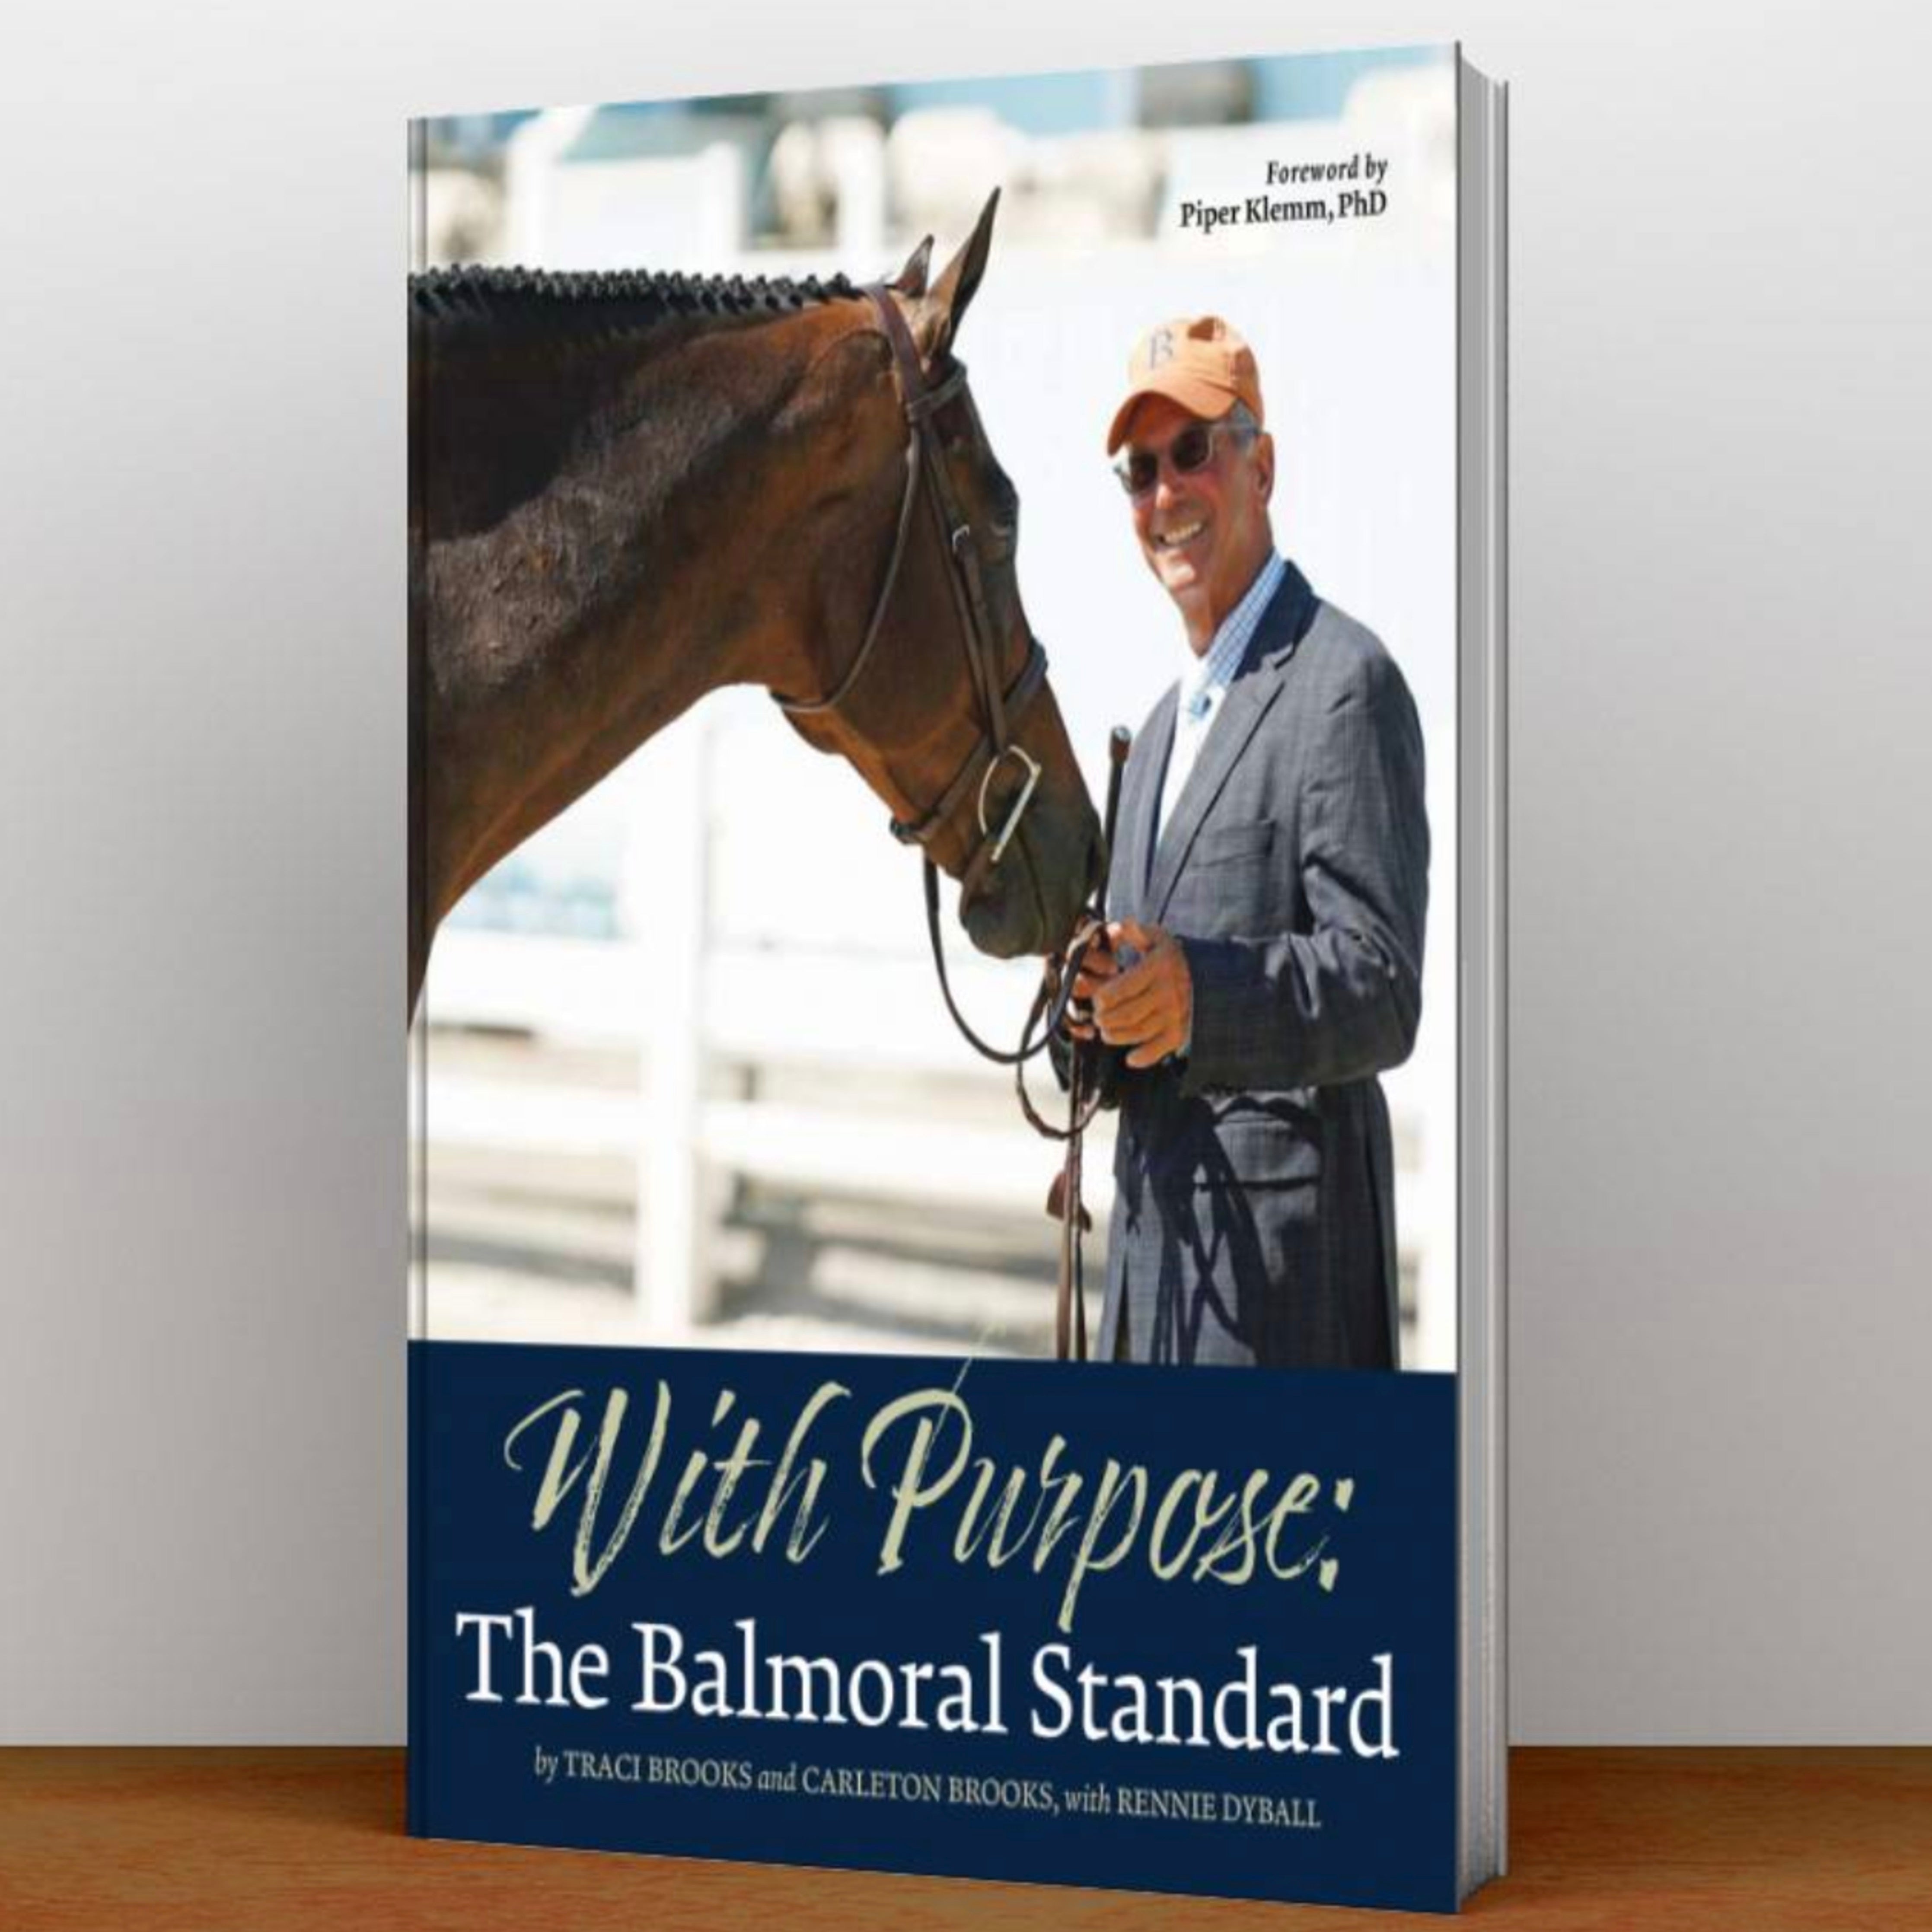 With Purpose: The Balmoral Standard